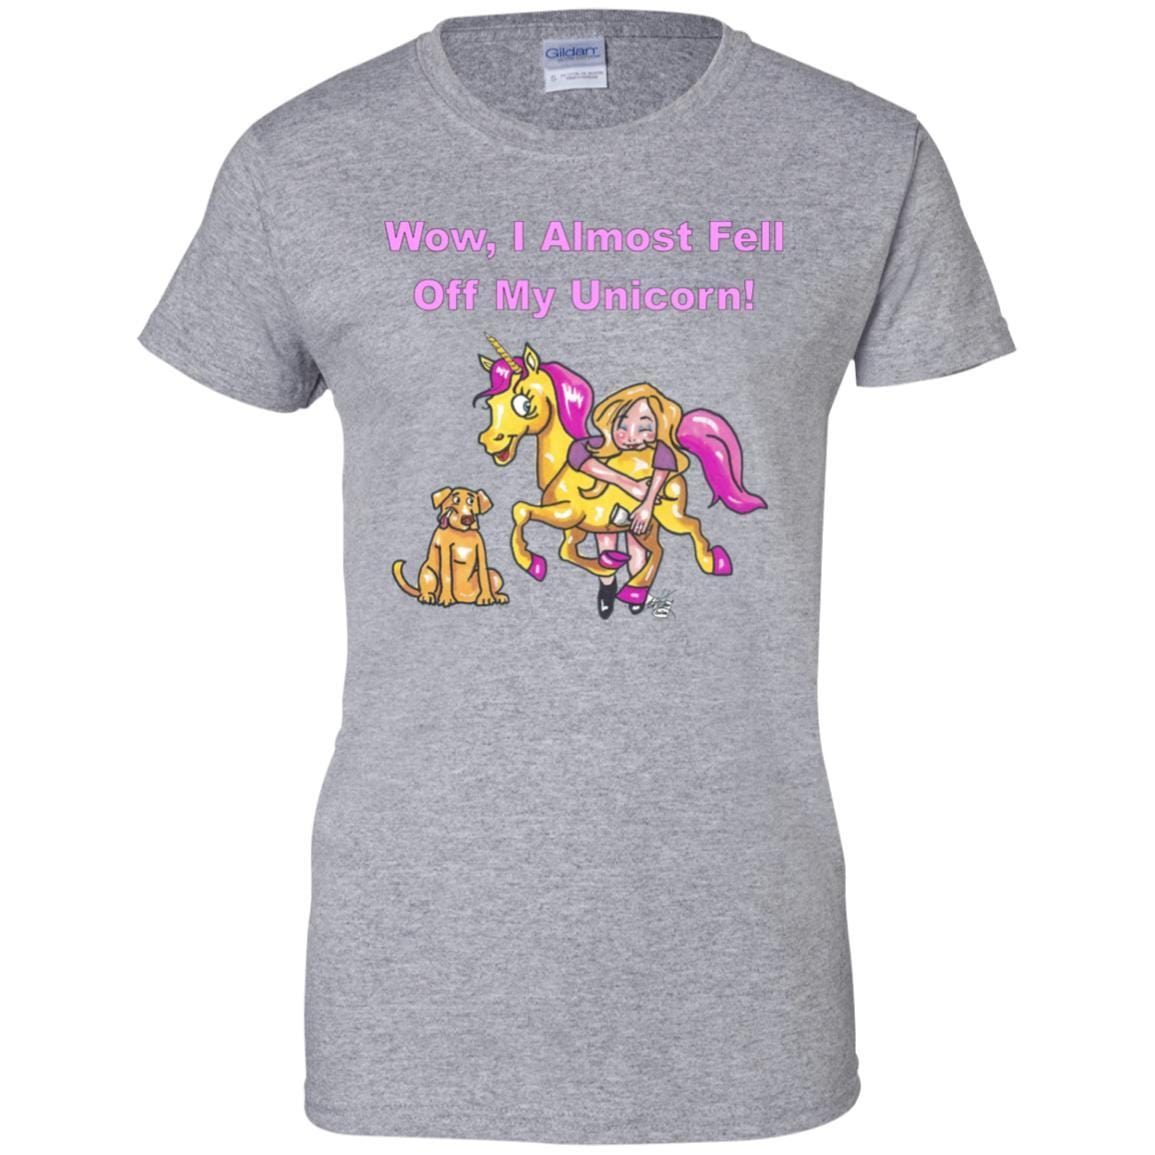 T-Shirts Sport Grey / X-Small WineyBitches.co "Wow I Almost Fell Off My Unicorn Ladies' 100% Cotton T-Shirt WineyBitchesCo